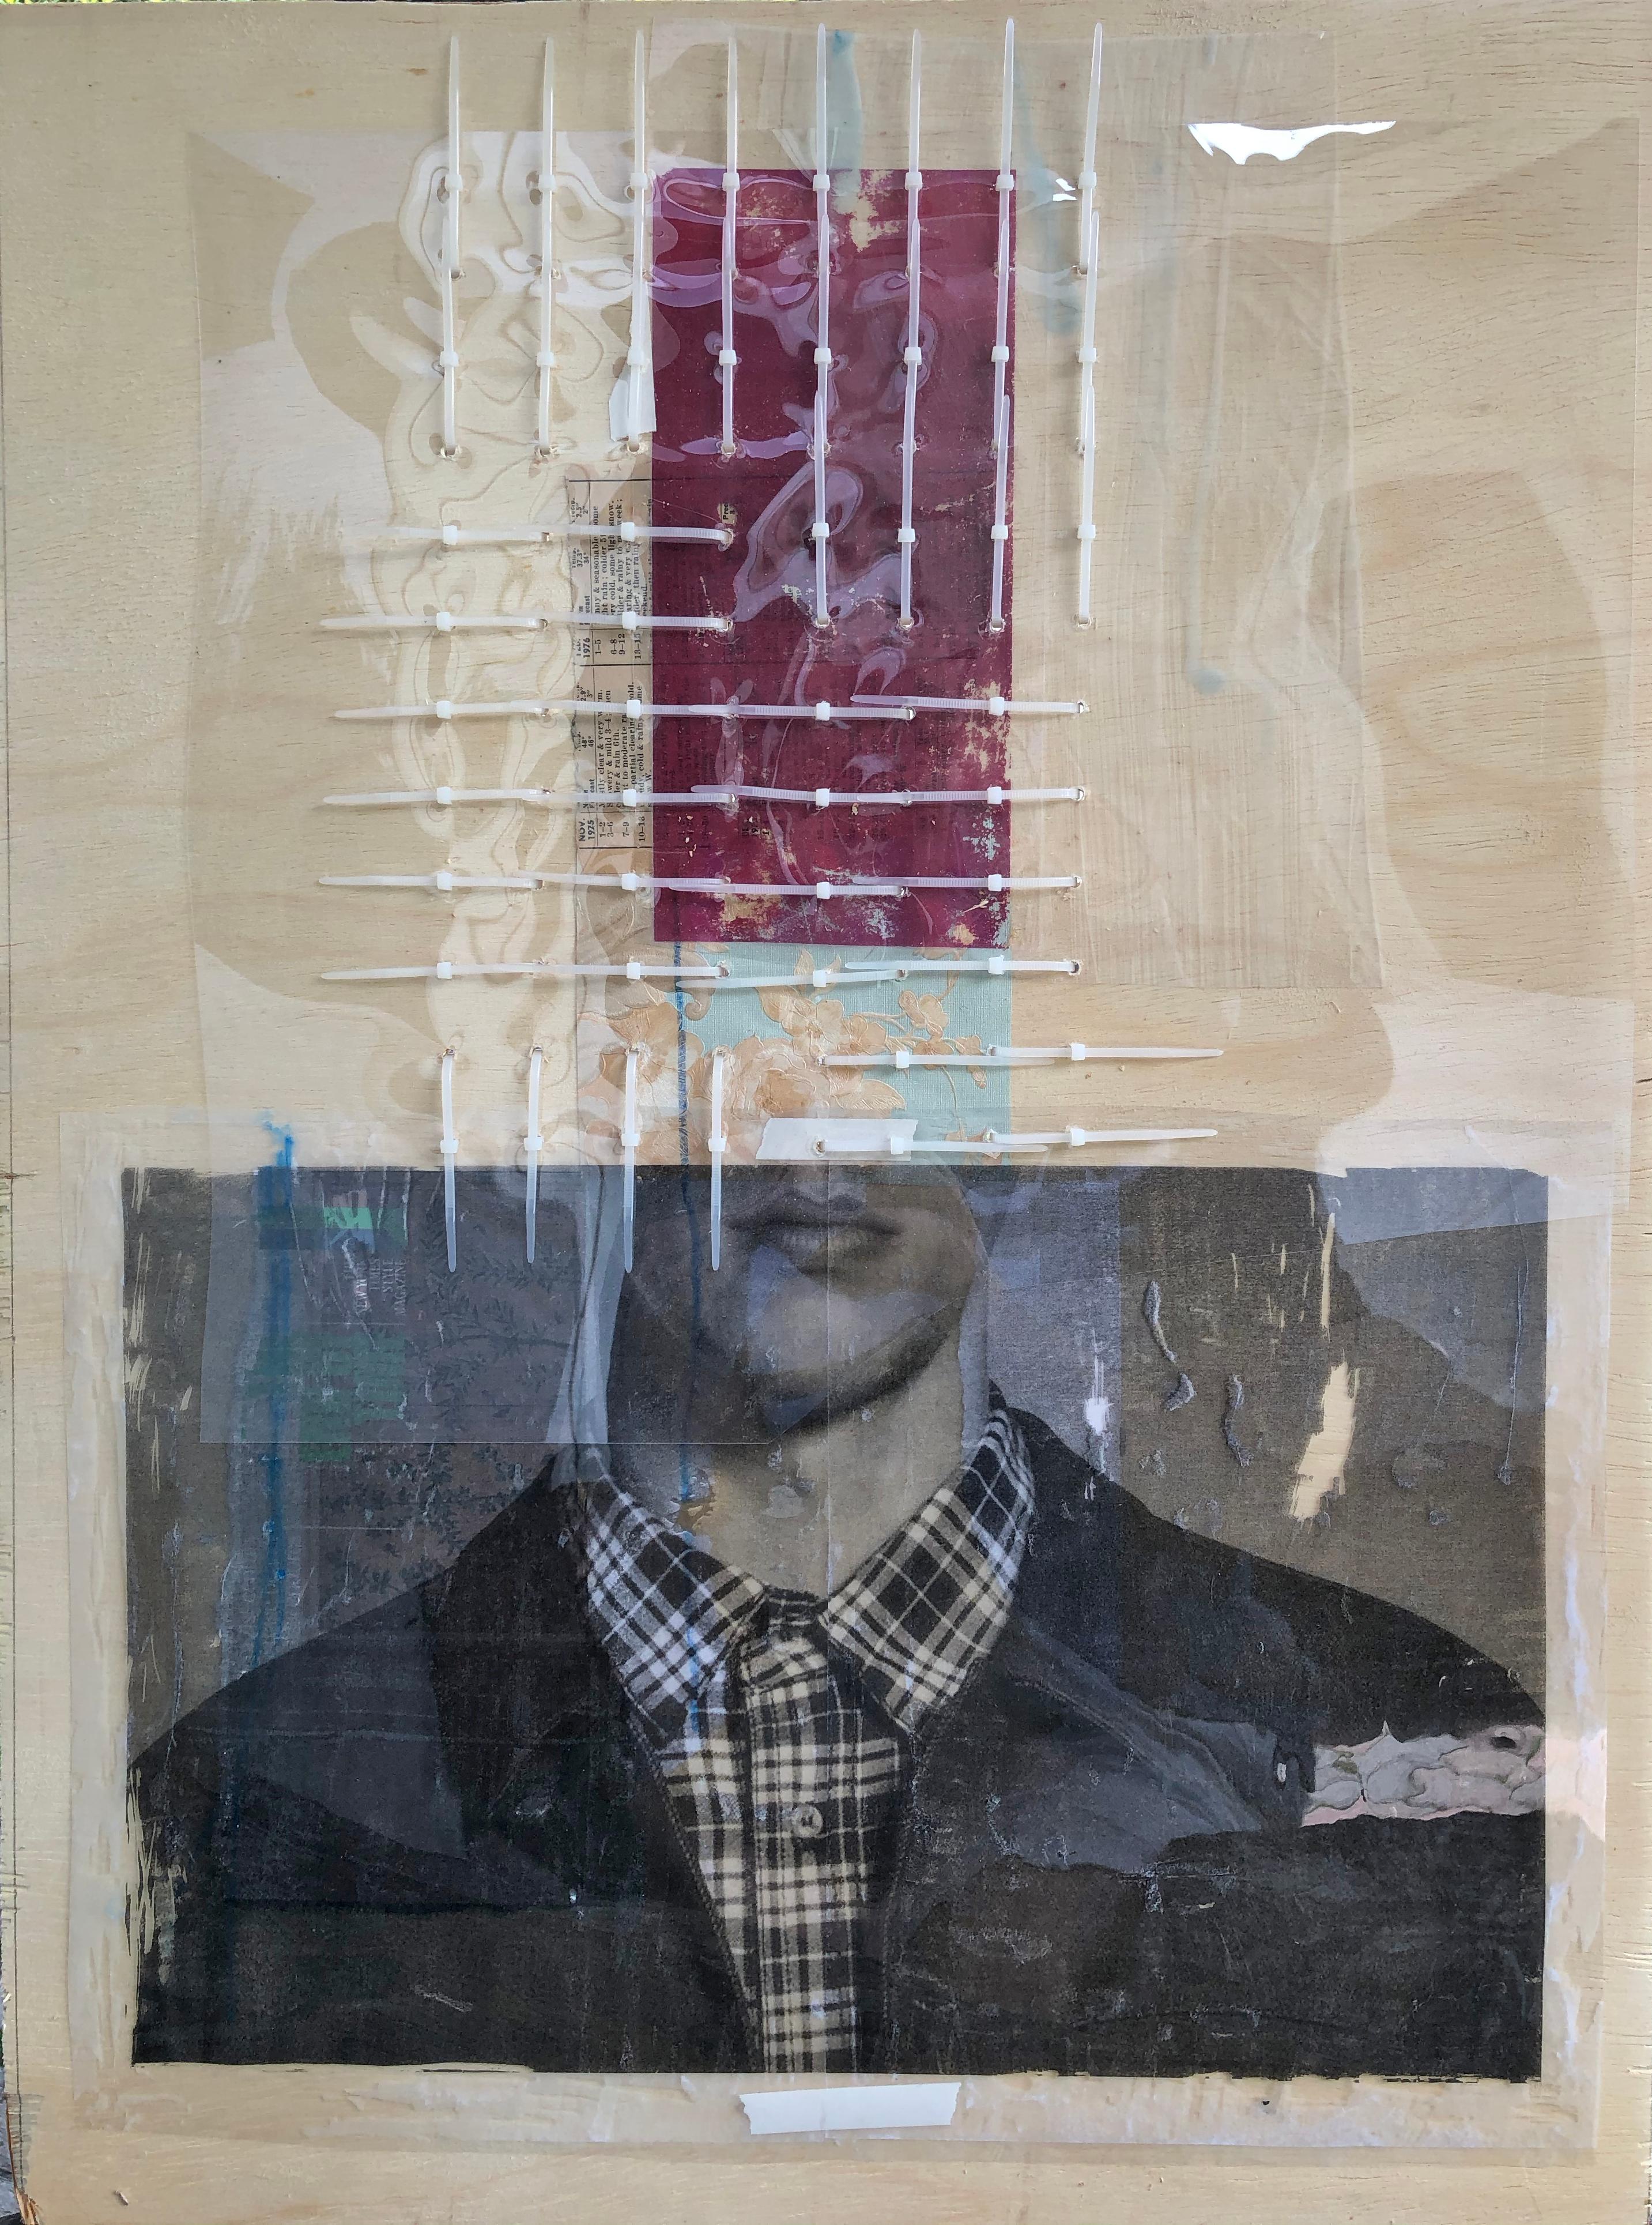 Untitled, 2020
Image size: 24 in. H x 17.71 in. W
Collage, image transfer on acetate, nylon cables ties
One of a Kind
_________________________________
Roberto Fonfría lives and works in Miami, Fl 
He was born in Caracas, Venezuela in 1969
Roberto